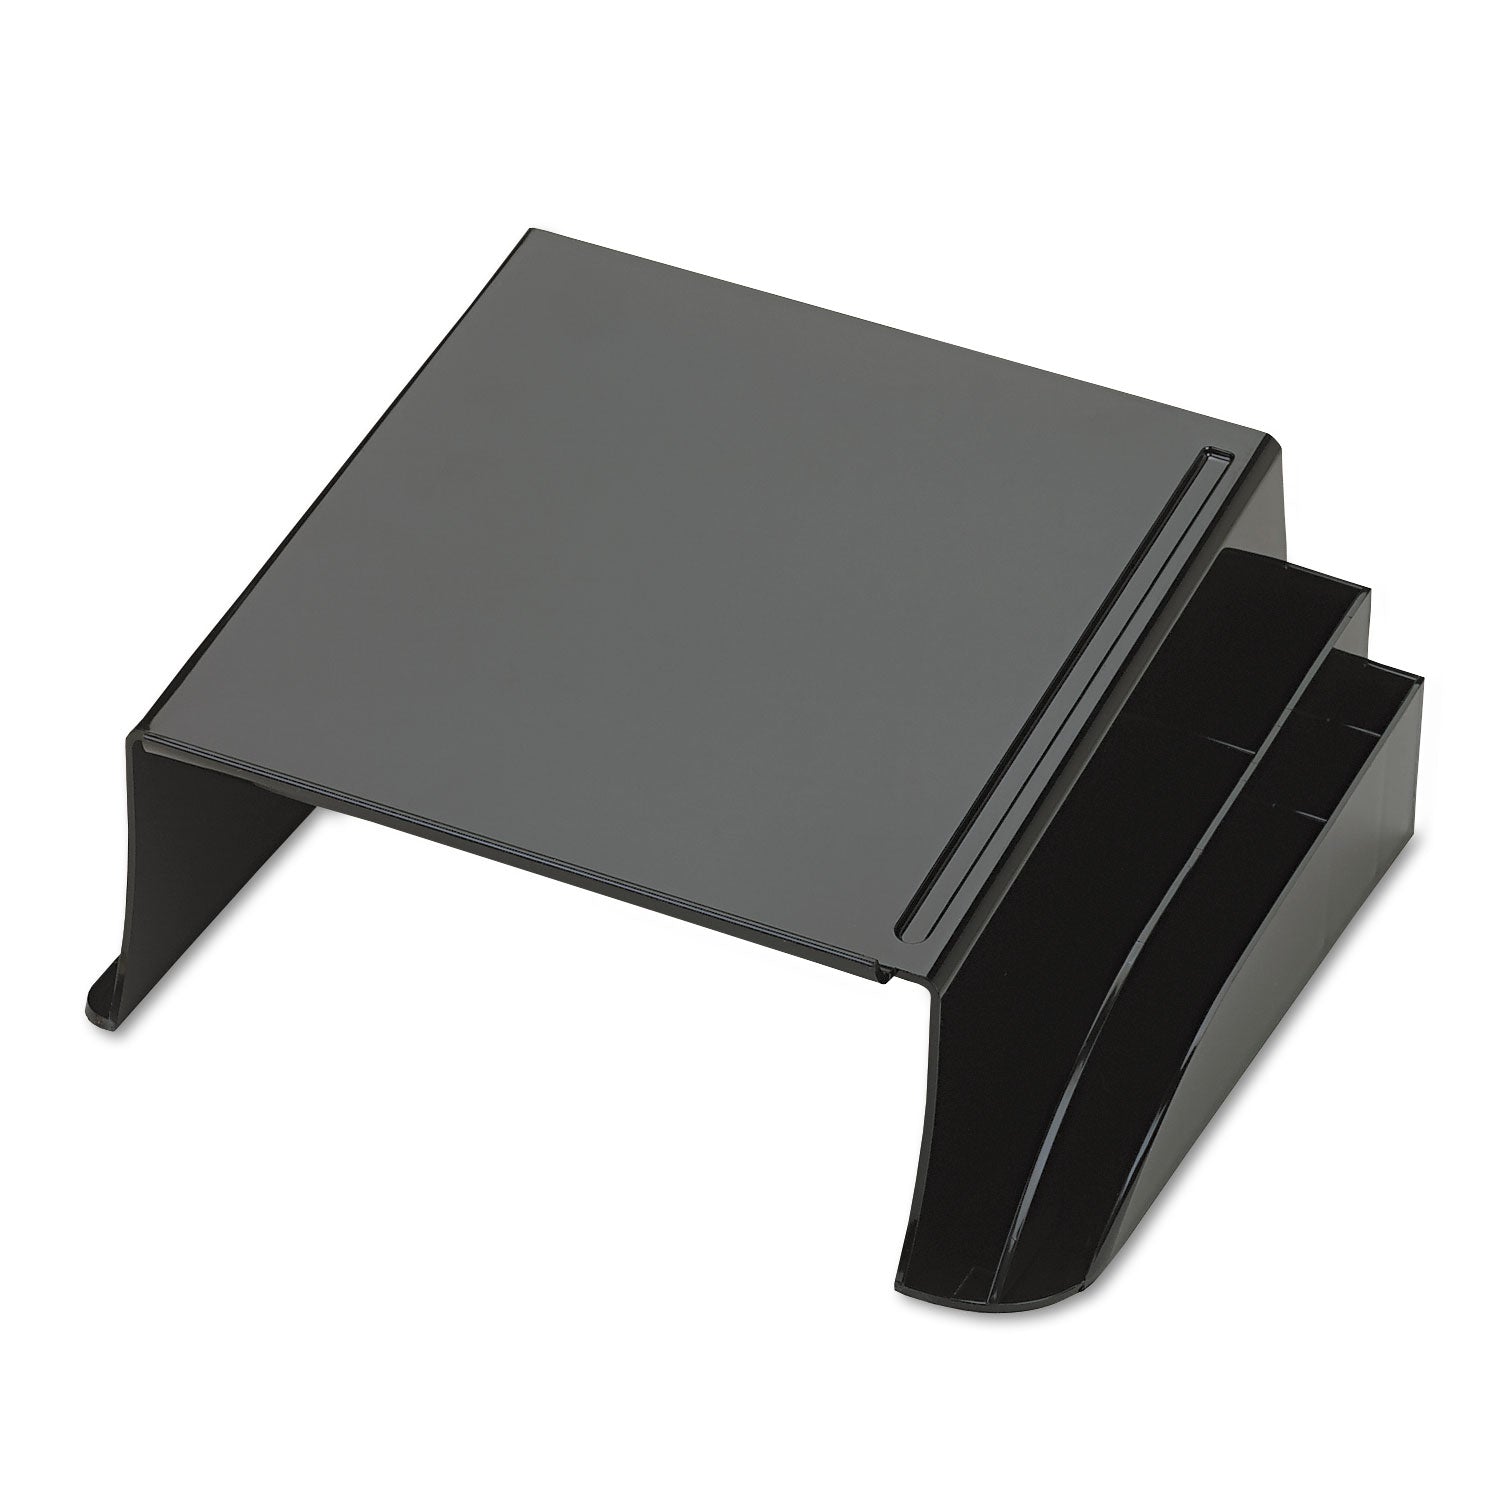 Officemate 2200 Series Telephone Stand, 12.25 x 10.5 x 5.25, Black - 